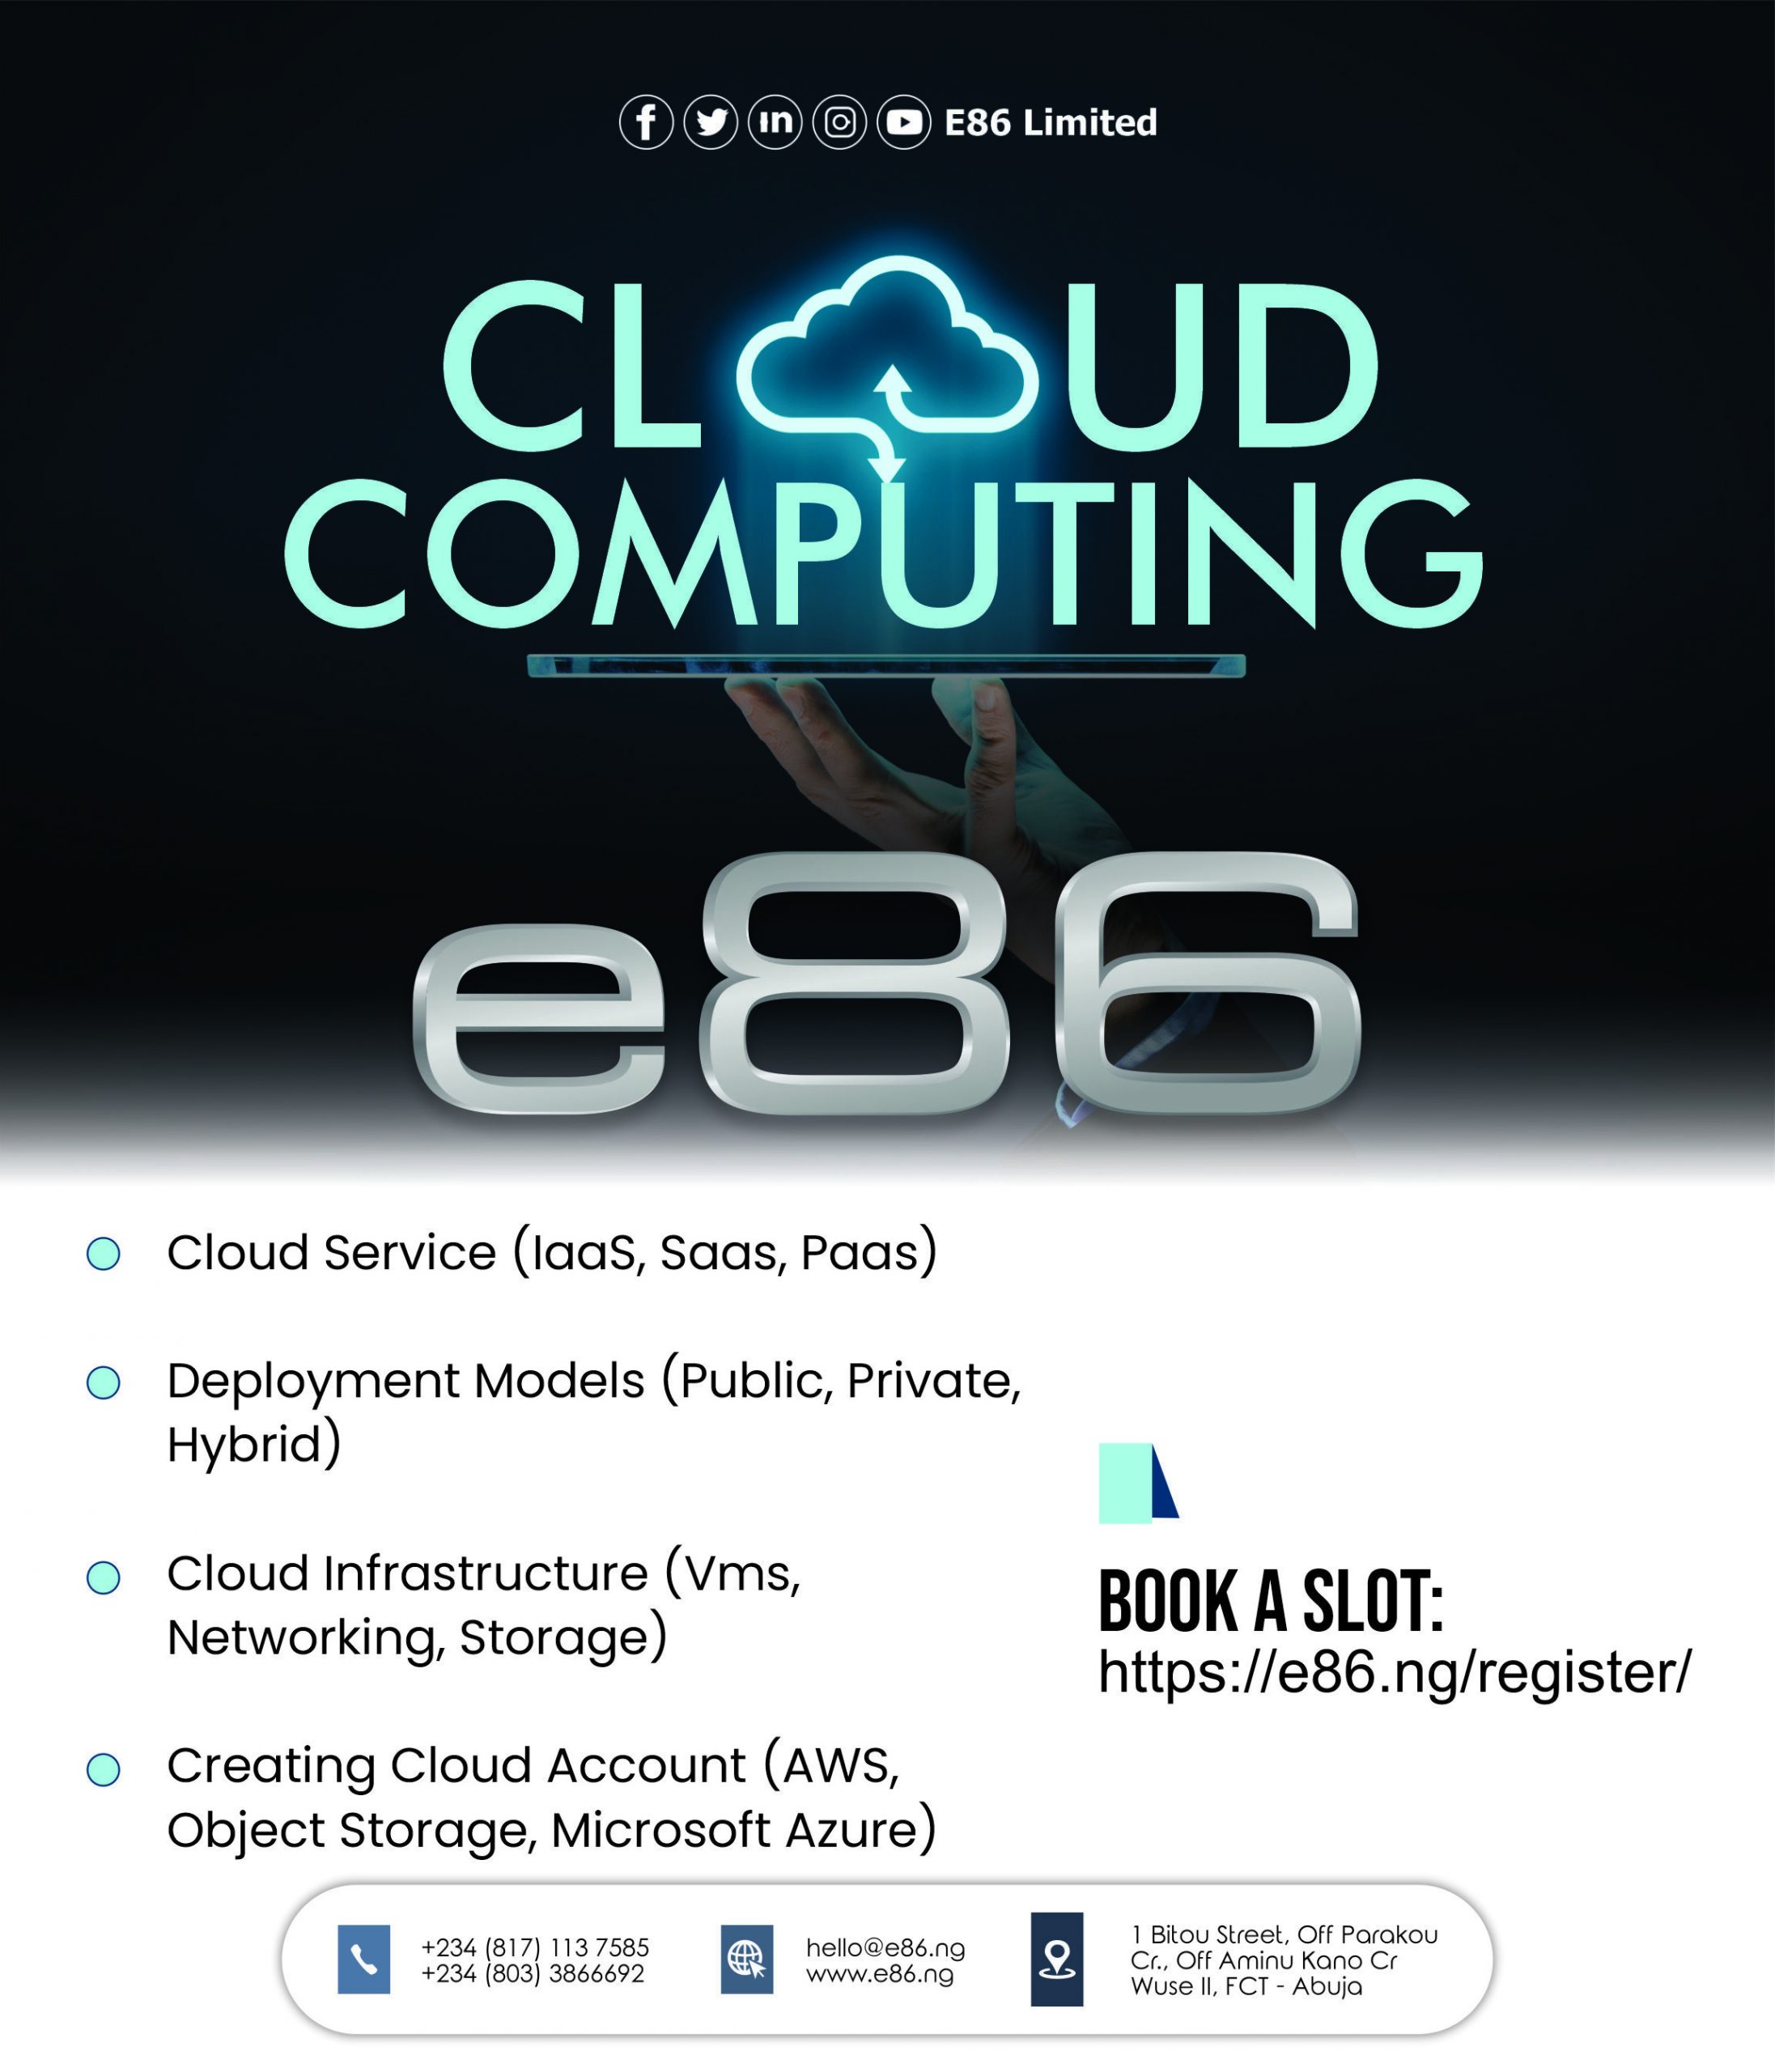 Cloud computing (System Infrastructure)